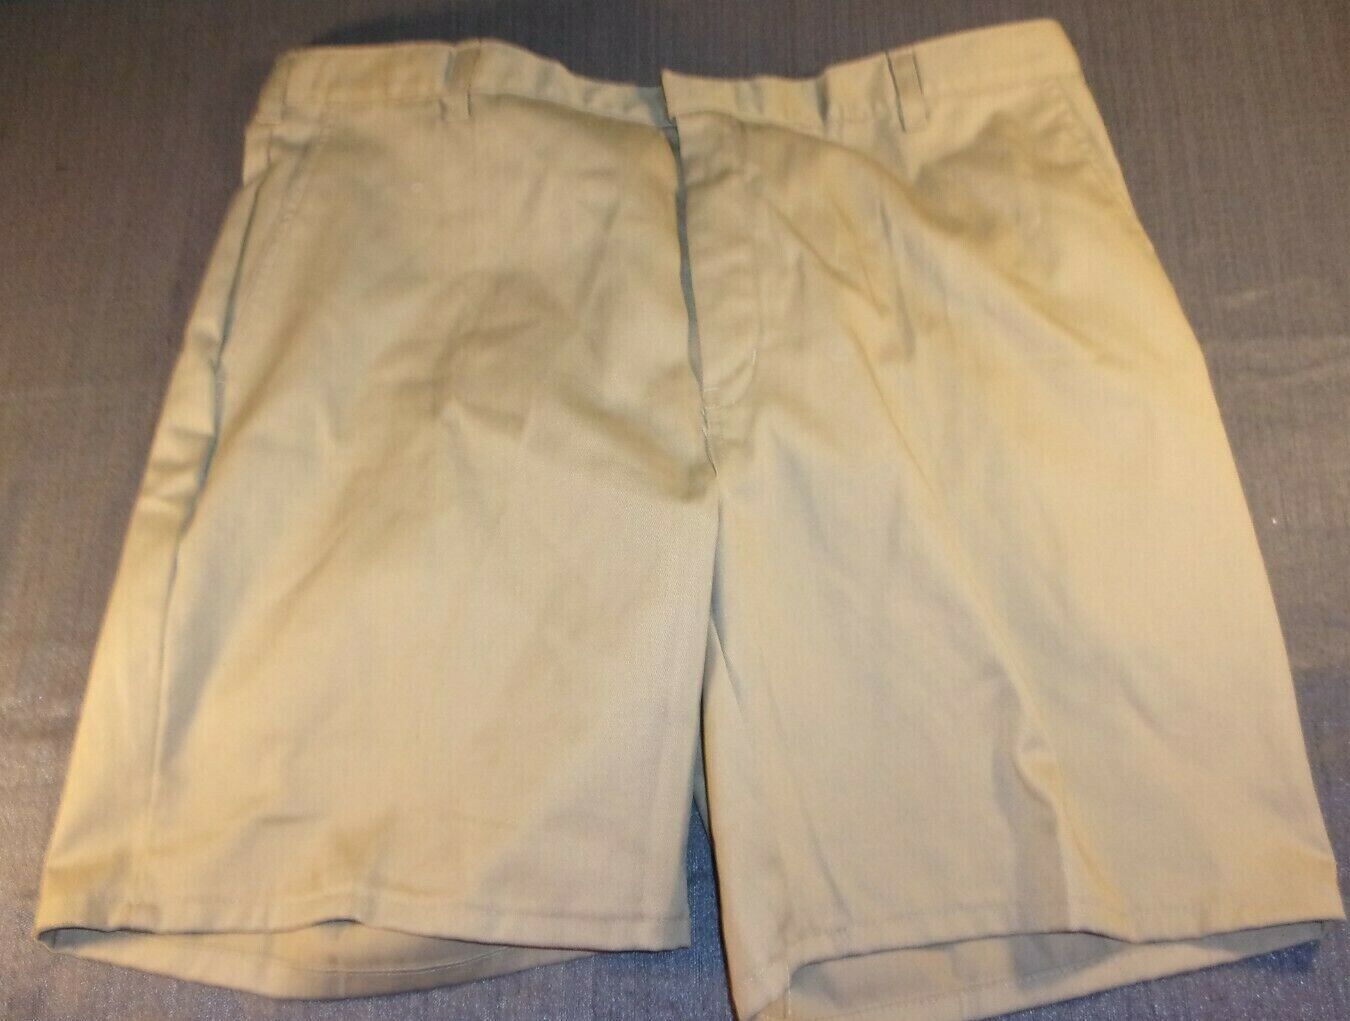 Primary image for USMC USN HOT WEATHER MILITARY CARGO TACTICAL SHORTS TAN 42 X 8 MADE IN THE USA